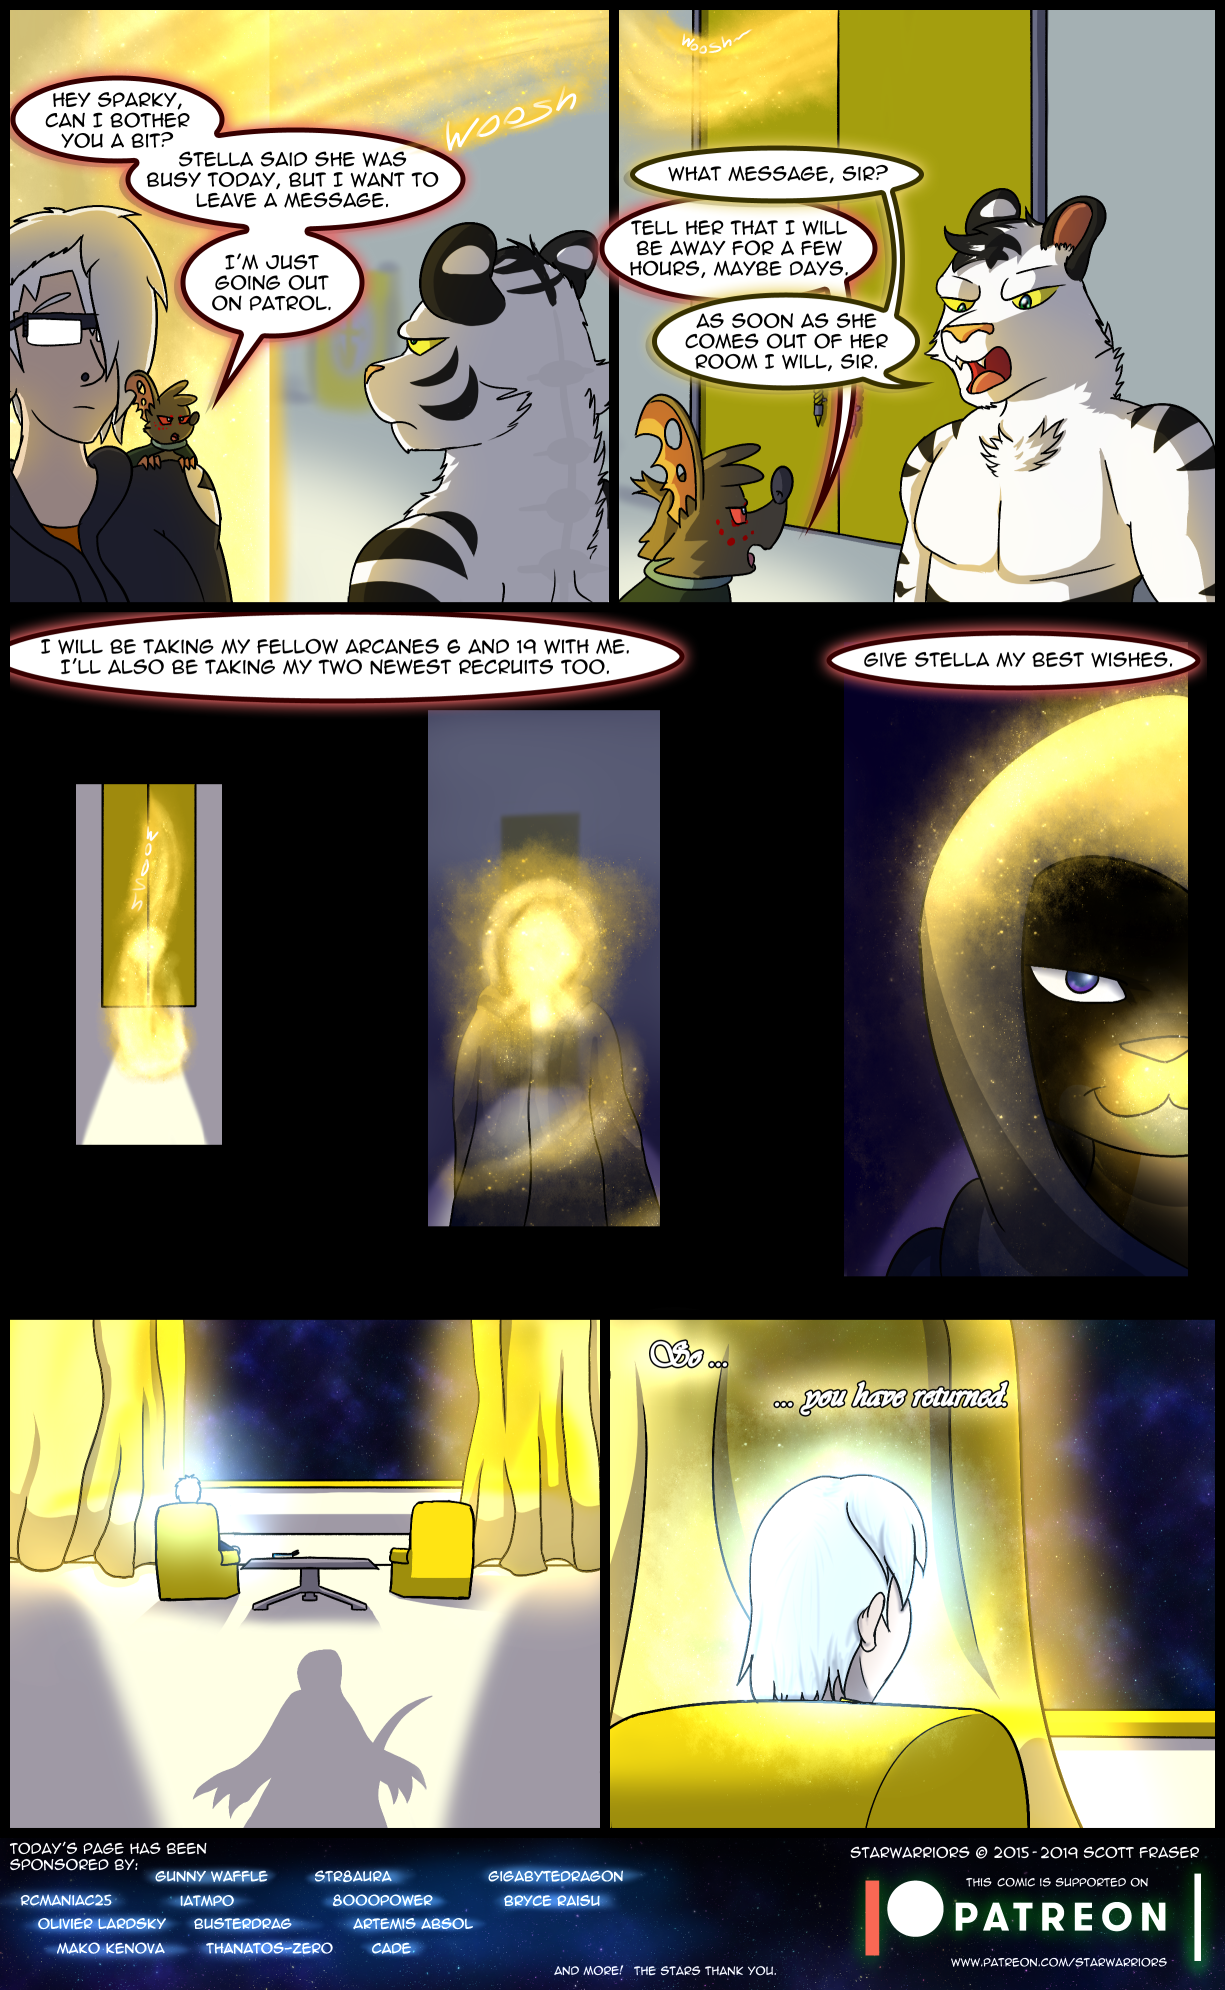 Ch4 Page 22 – To Return